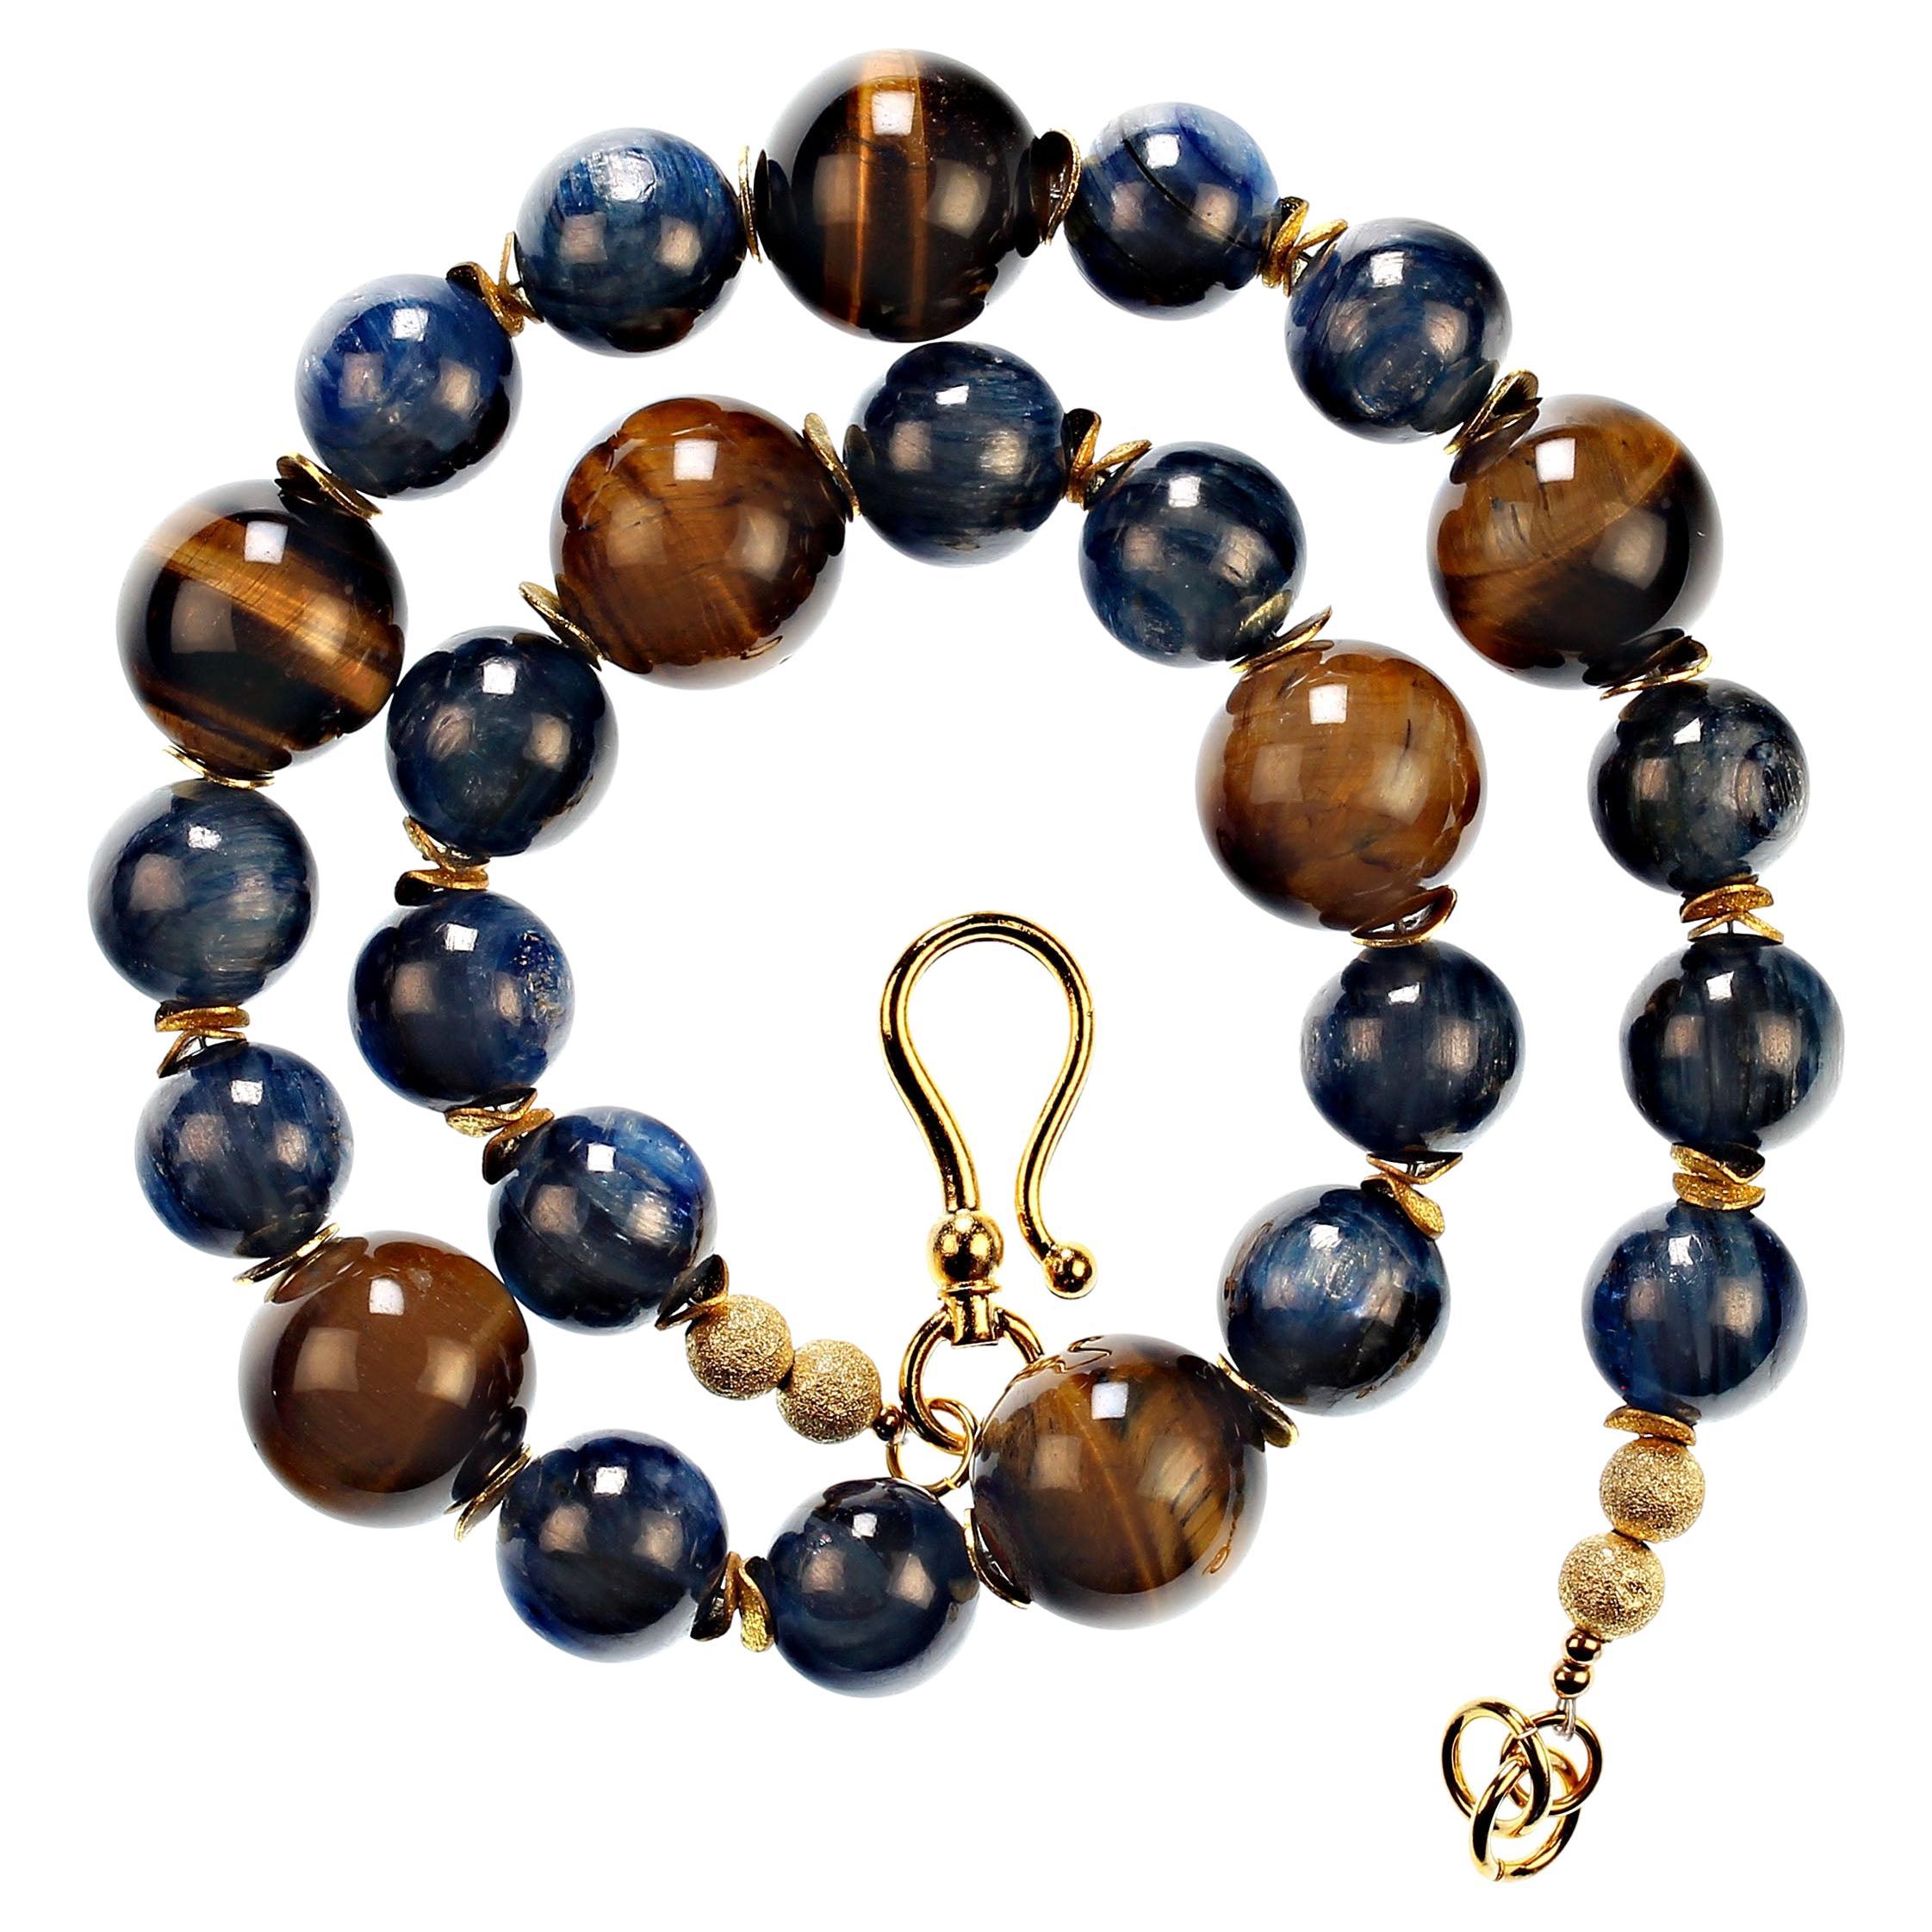 AJD 20 Inch Distinctive Necklace of Natural Tiger's Eye and Blue Kyanite For Sale